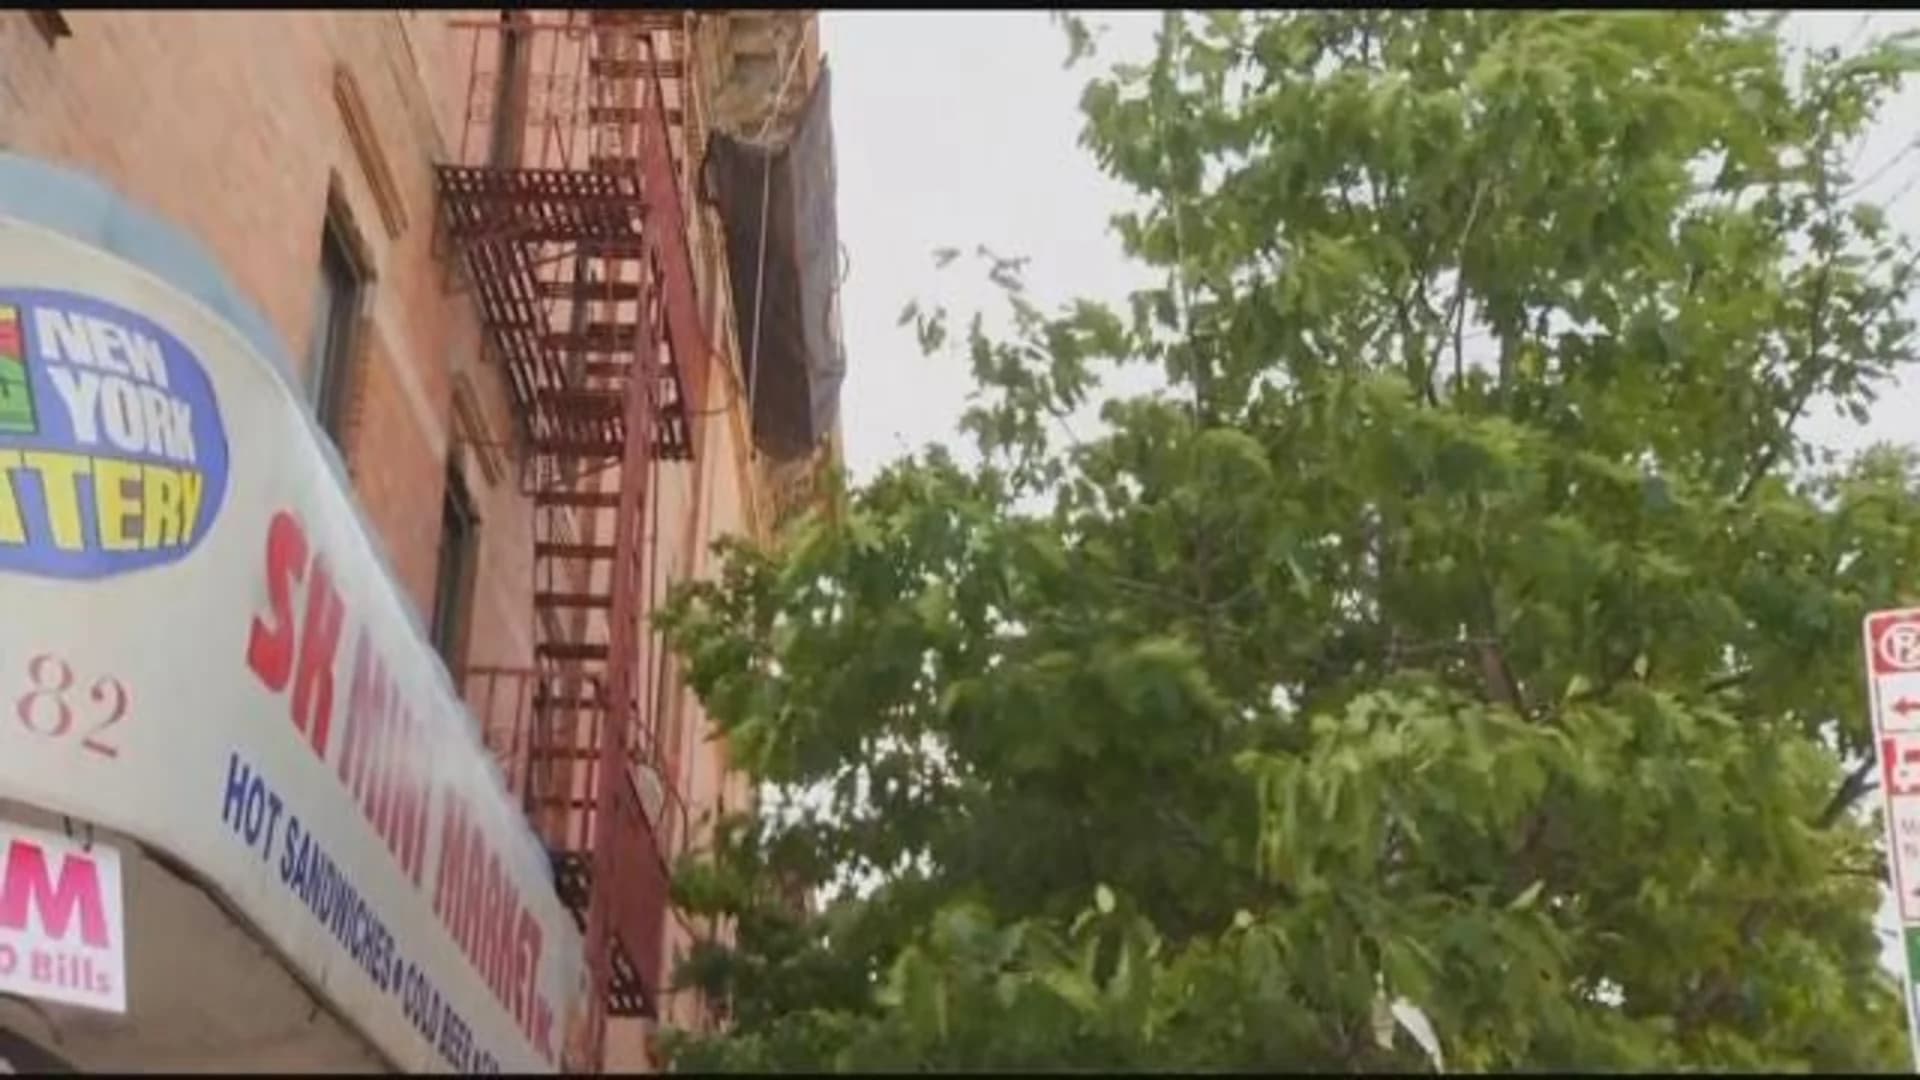 Construction worker dies after fall from scaffolding